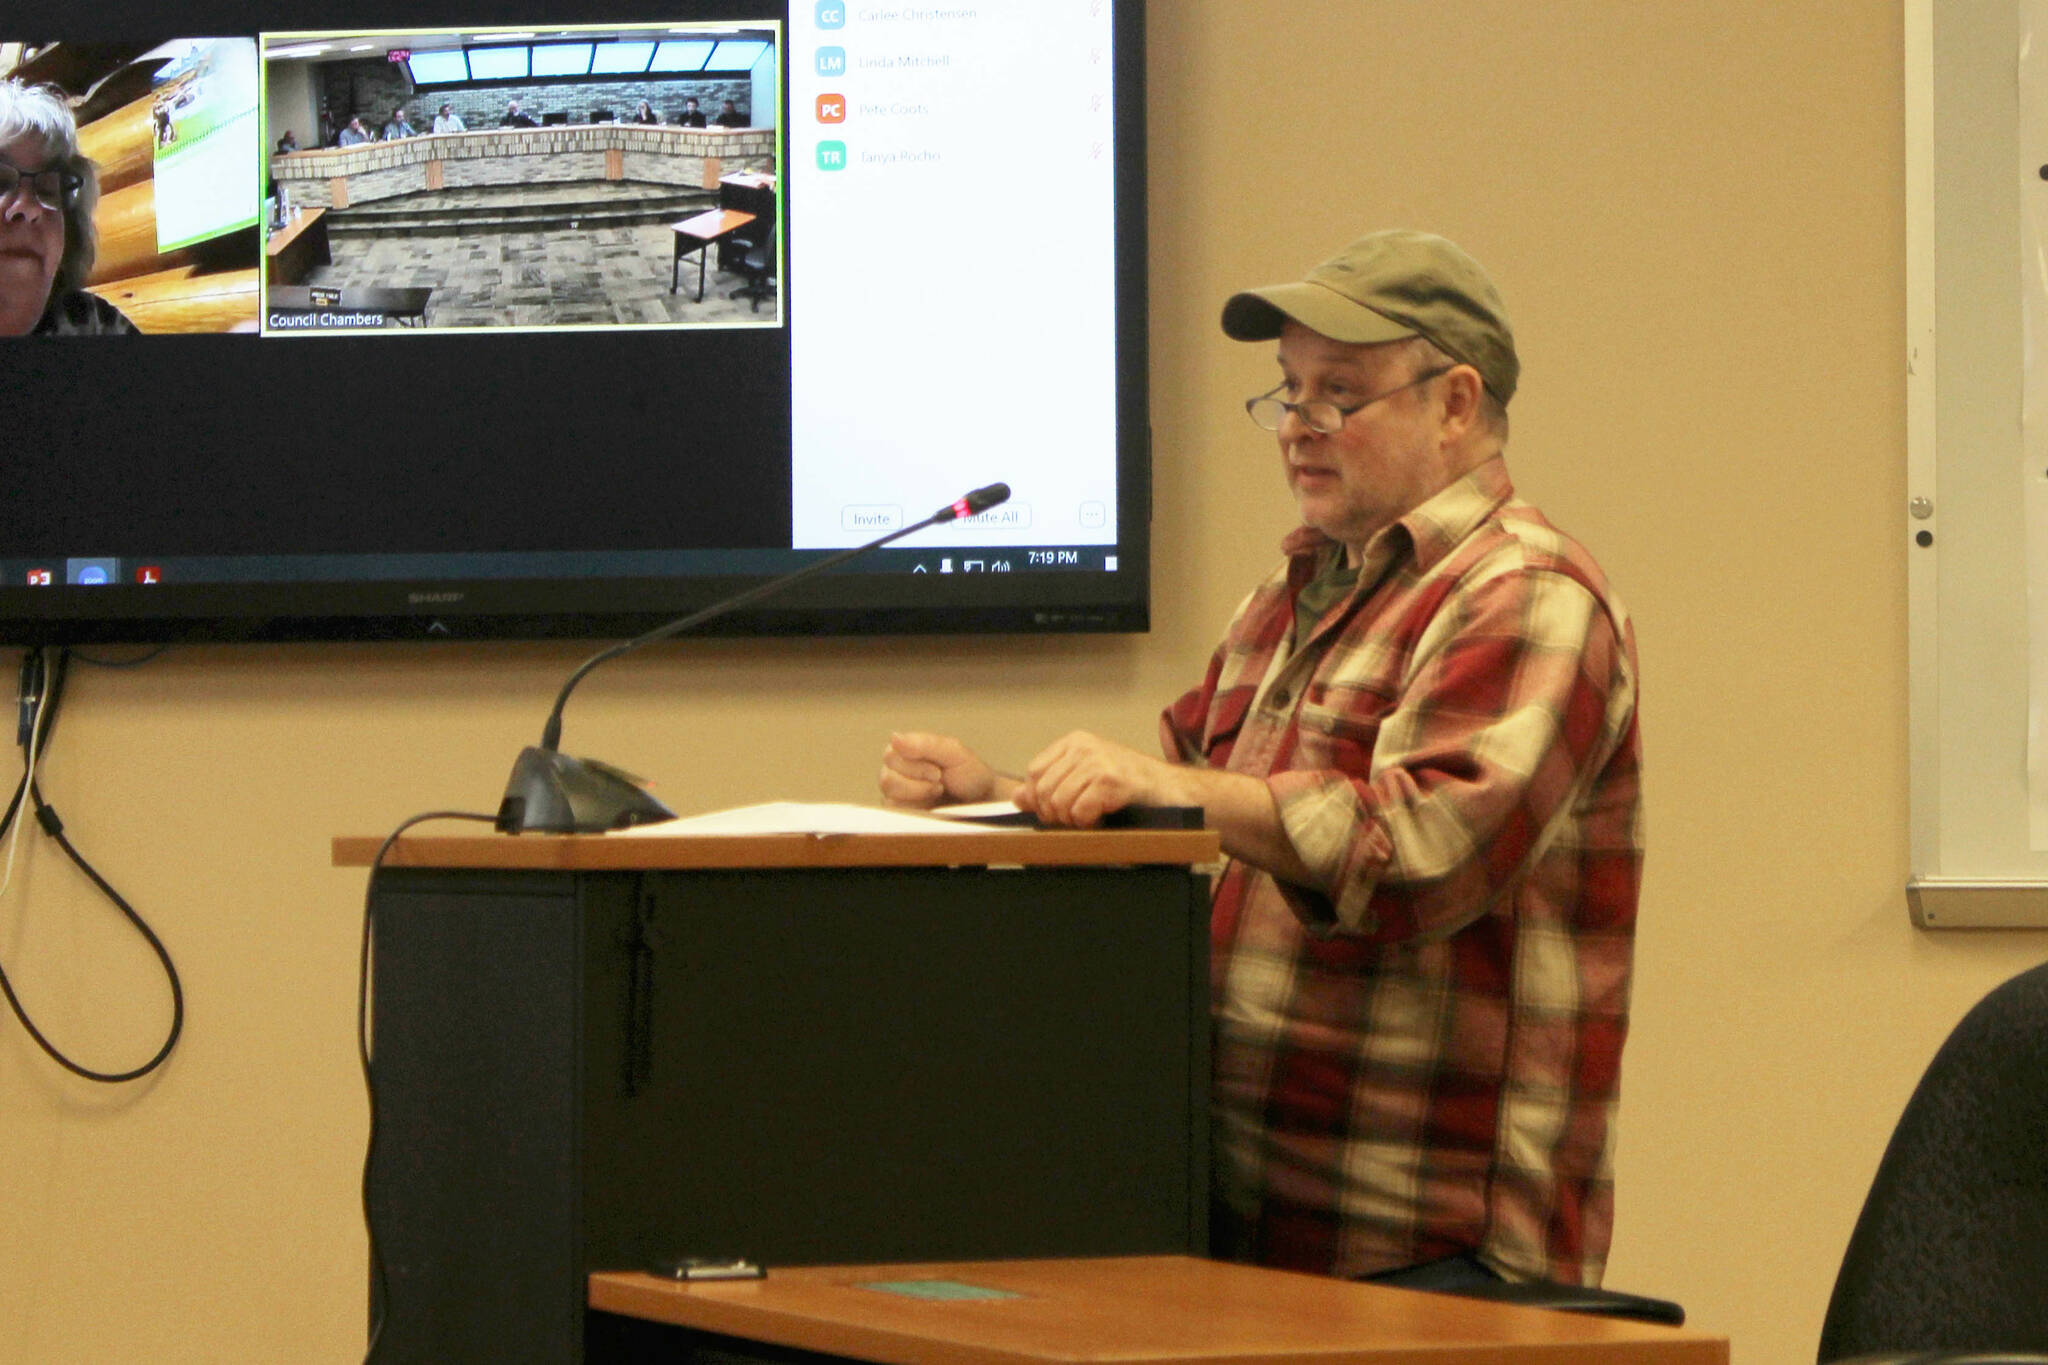 Dustin Aaronson, who owns Copy Cats Printing and Design in Kenai, speaks in support of a storefront improvement program during a Kenai City Council meeting on Wednesday, May 3, 2023, in Kenai, Alaska. (Ashlyn O’Hara/Peninsula Clarion)